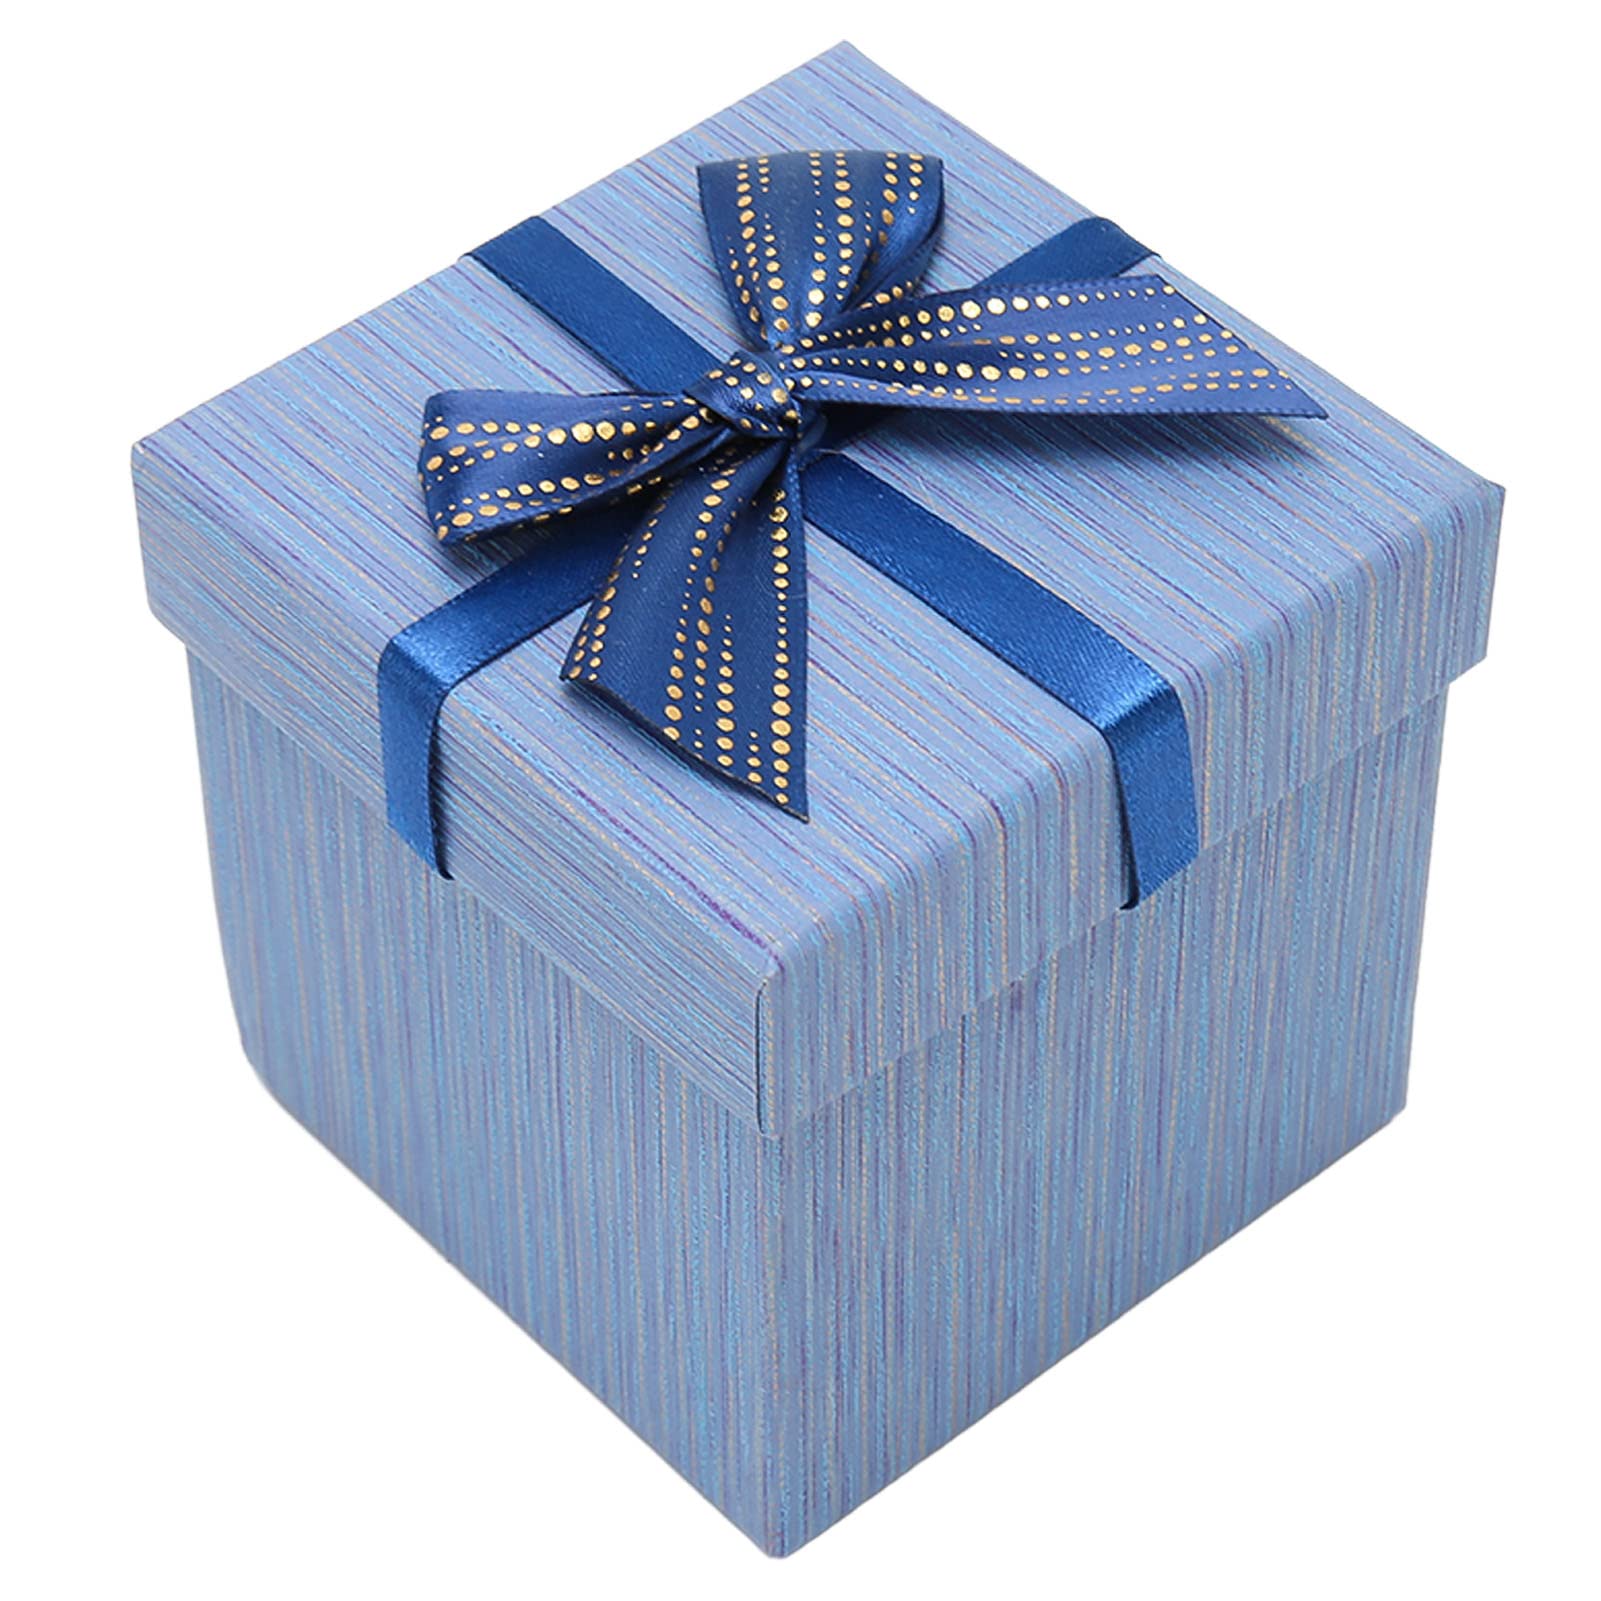 A wrapped gift box.